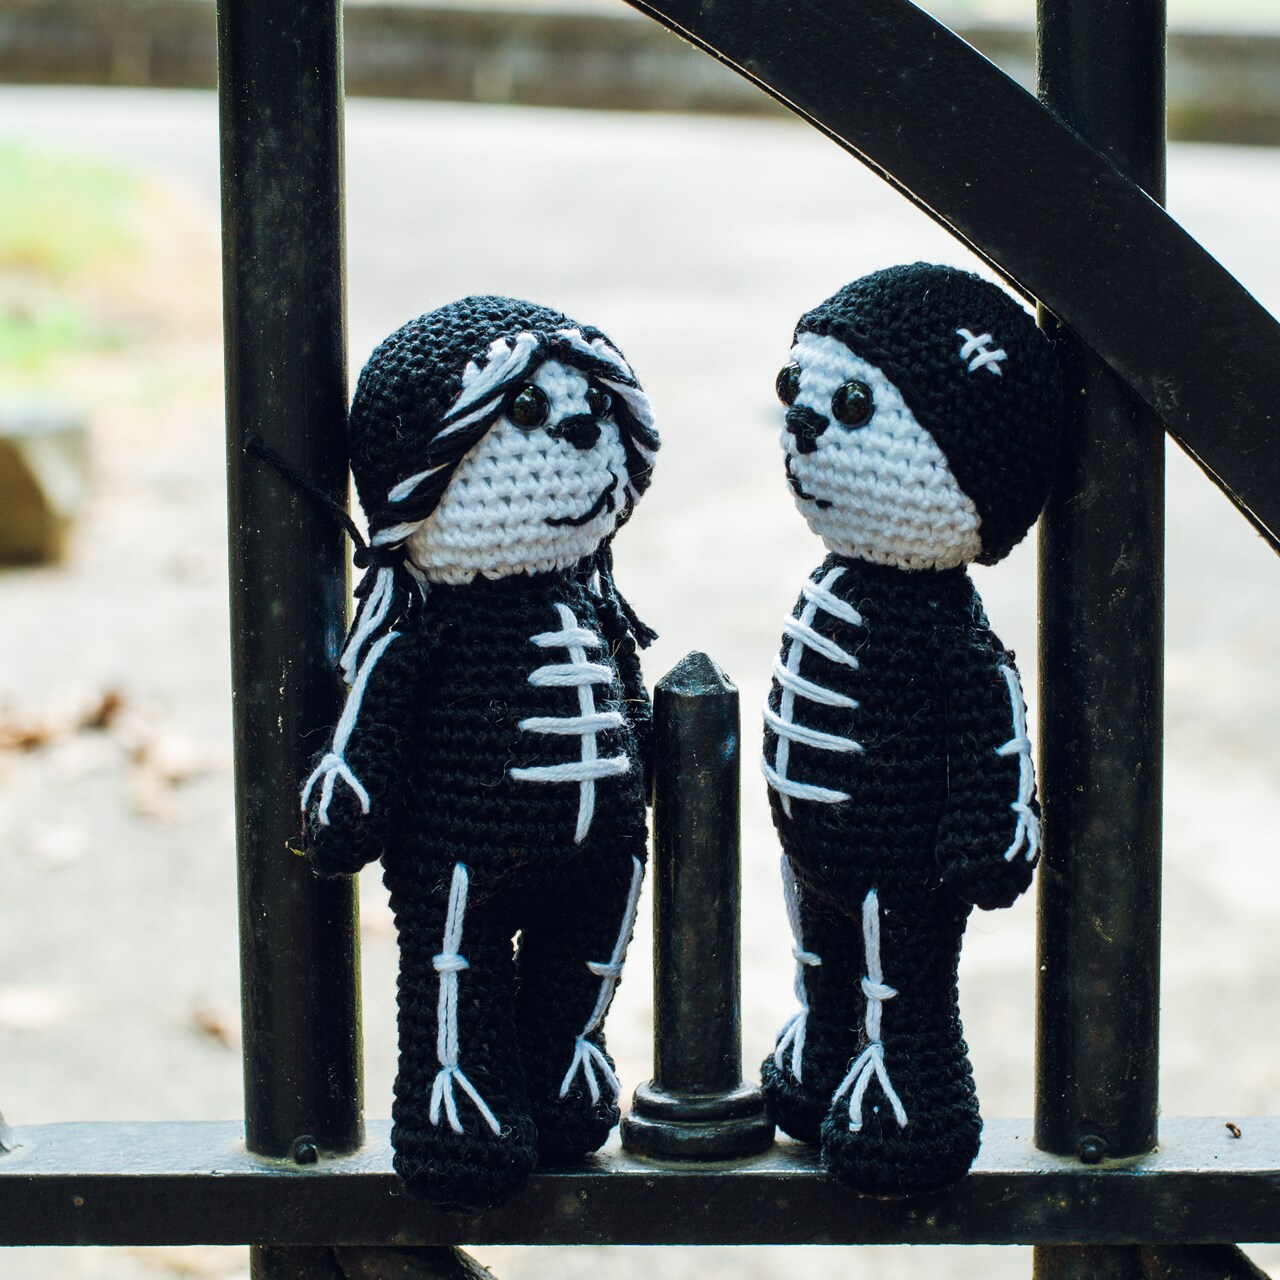 Learn To Make Amigurumi with Mr. & Mrs. Skeleton and Lion Brand®